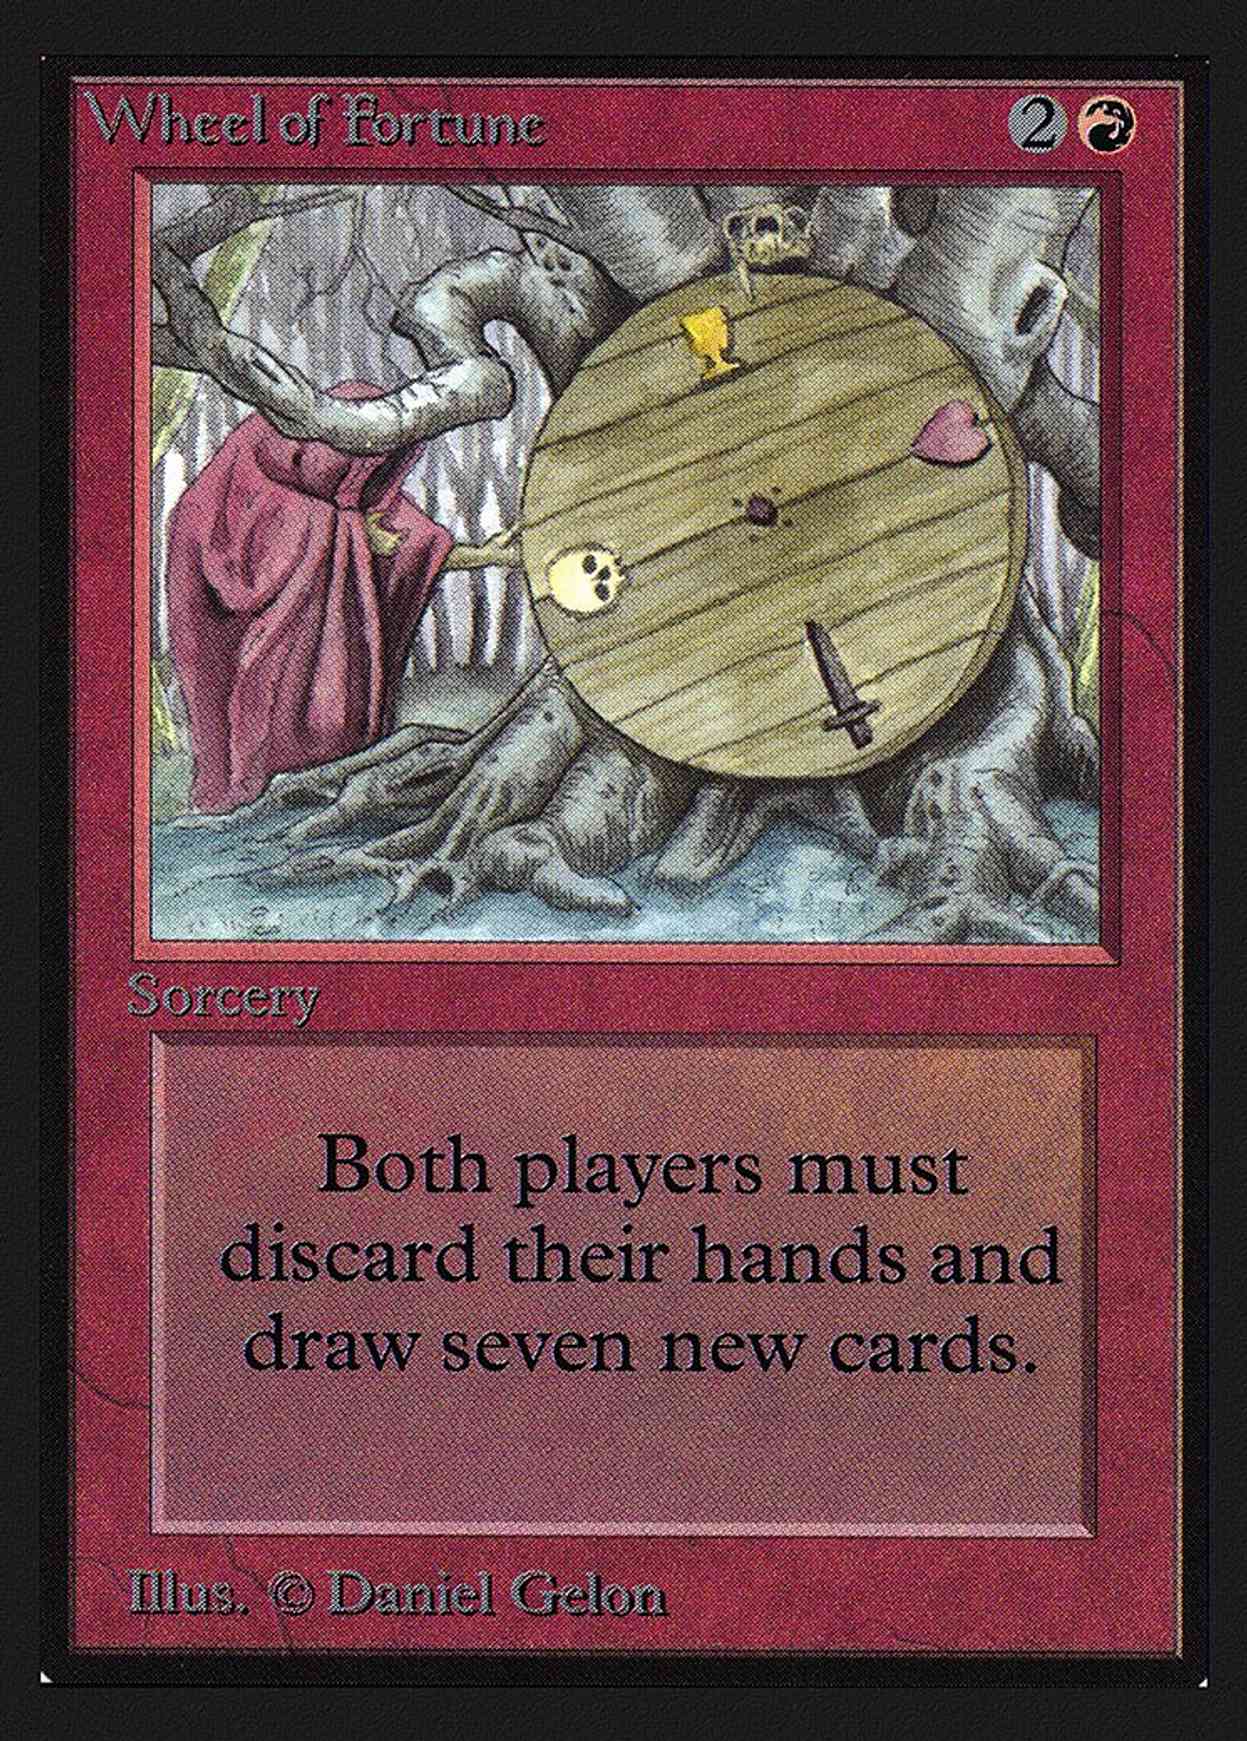 Wheel of Fortune (IE) magic card front